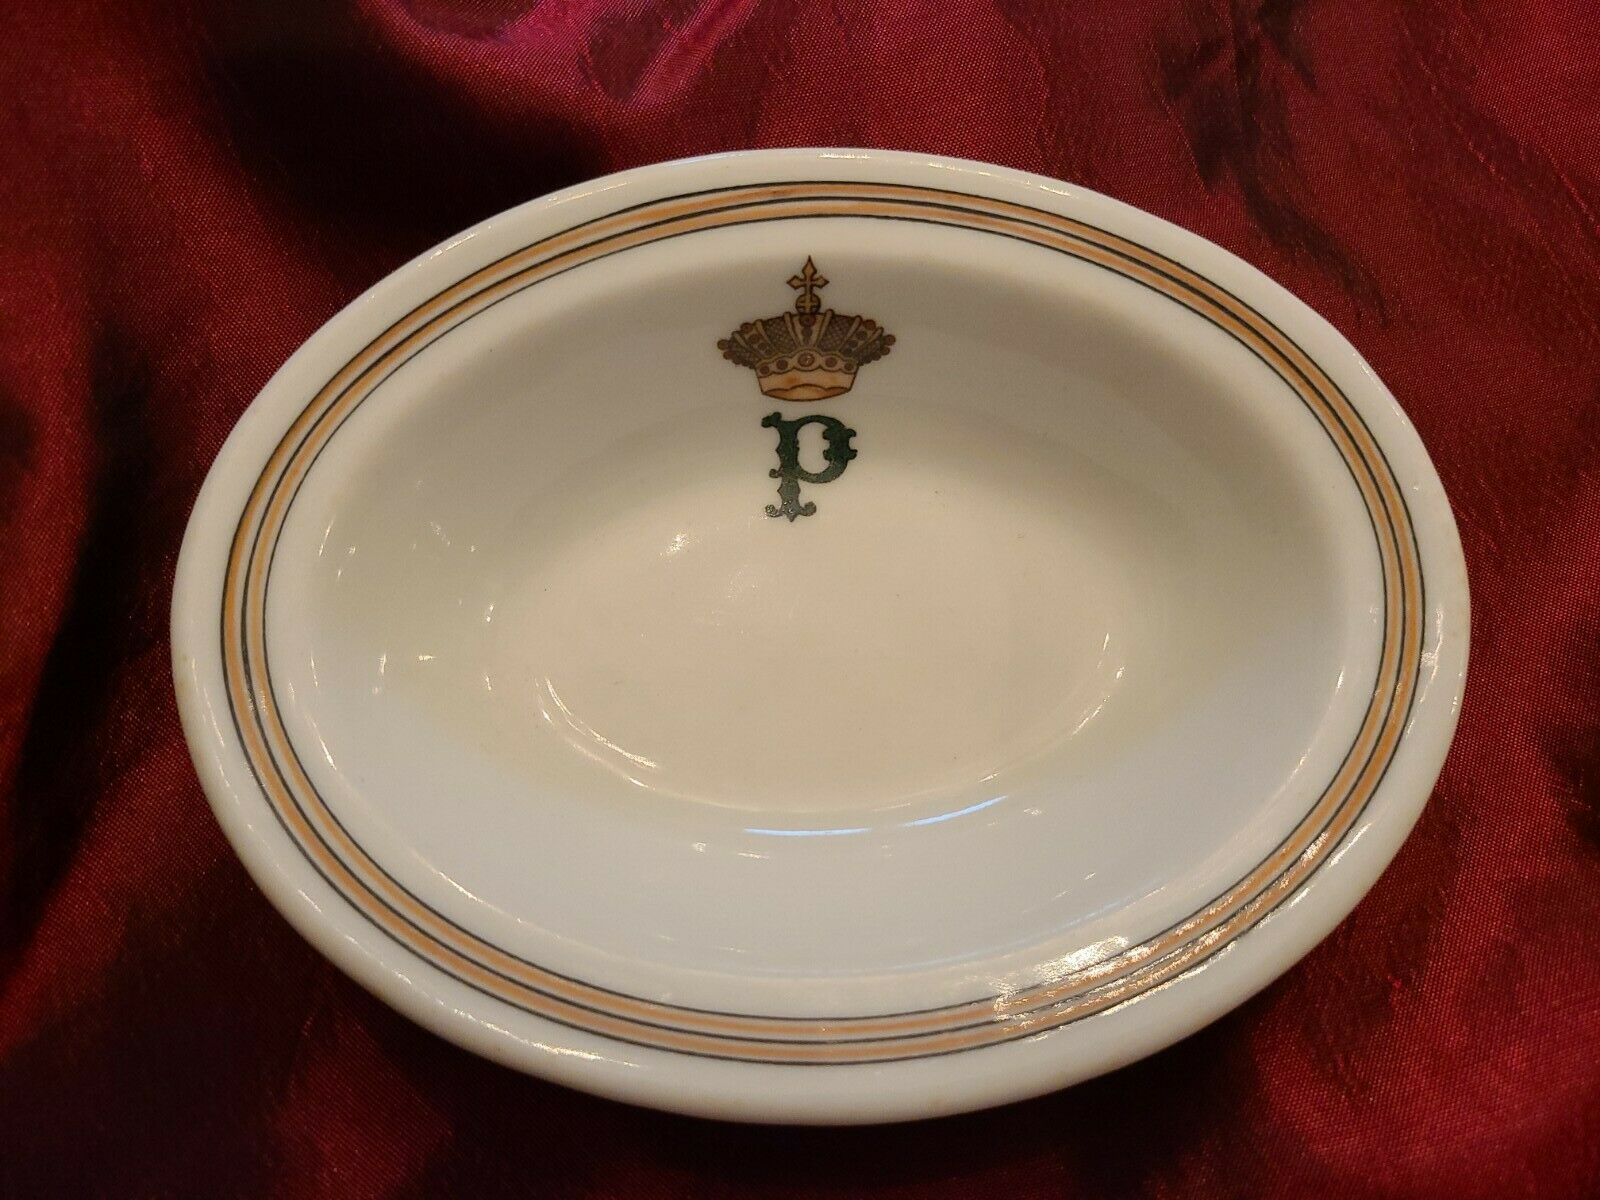 Unknown Hotel 5.25" Bowl By Syracuse China With Top Mark